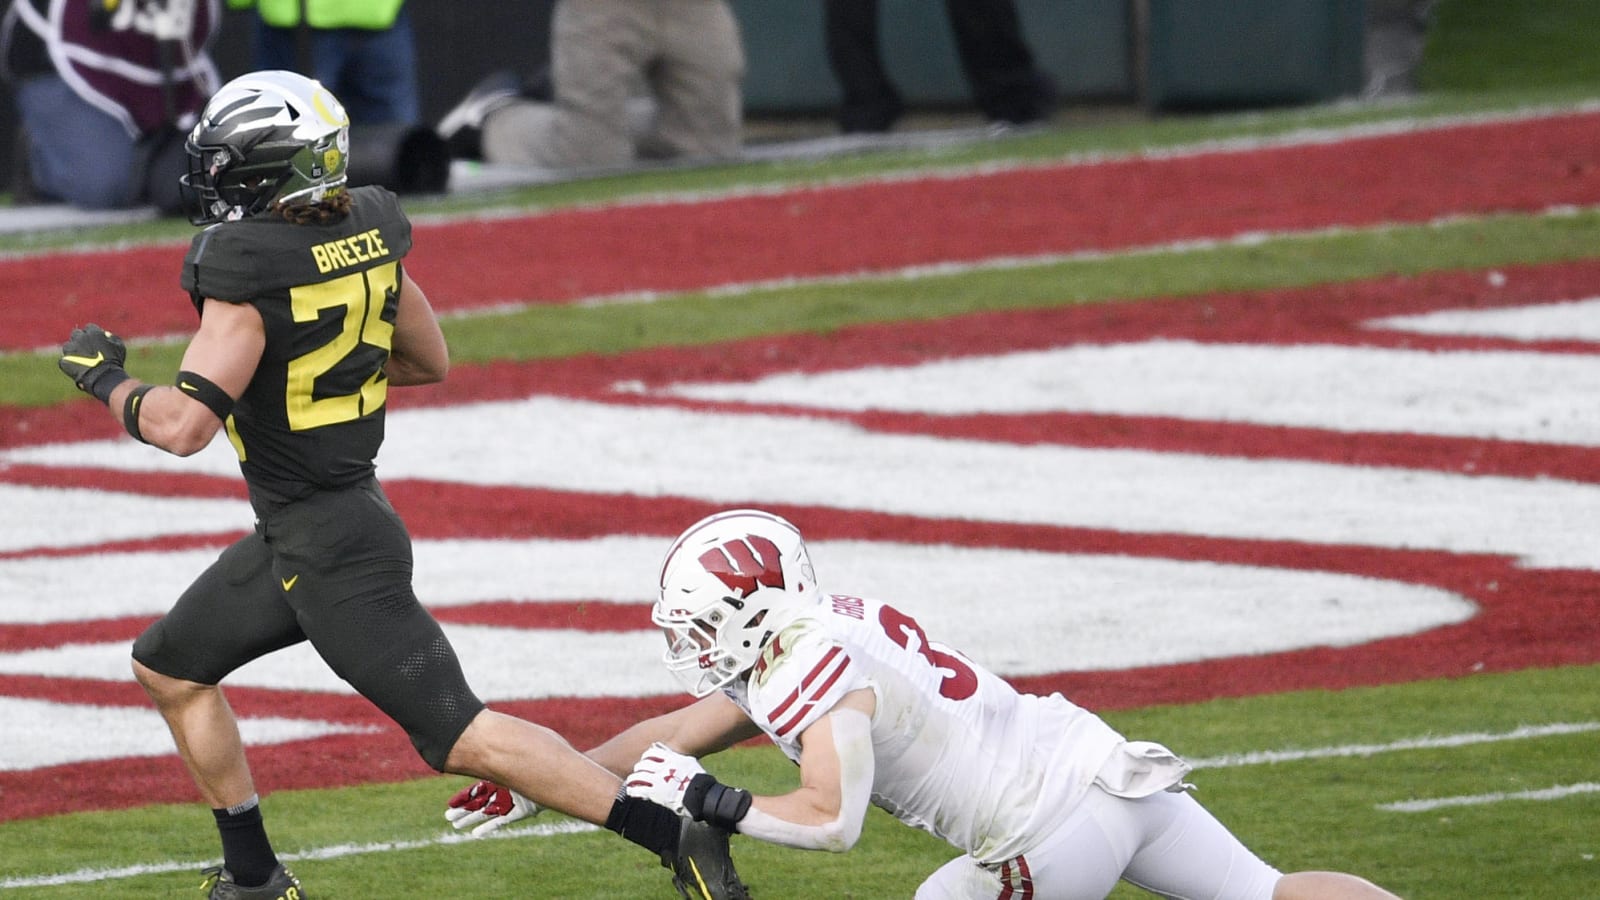 Watch: Wisconsin punter just drops the ball; Oregon scores go-ahead touchdown in Rose Bowl